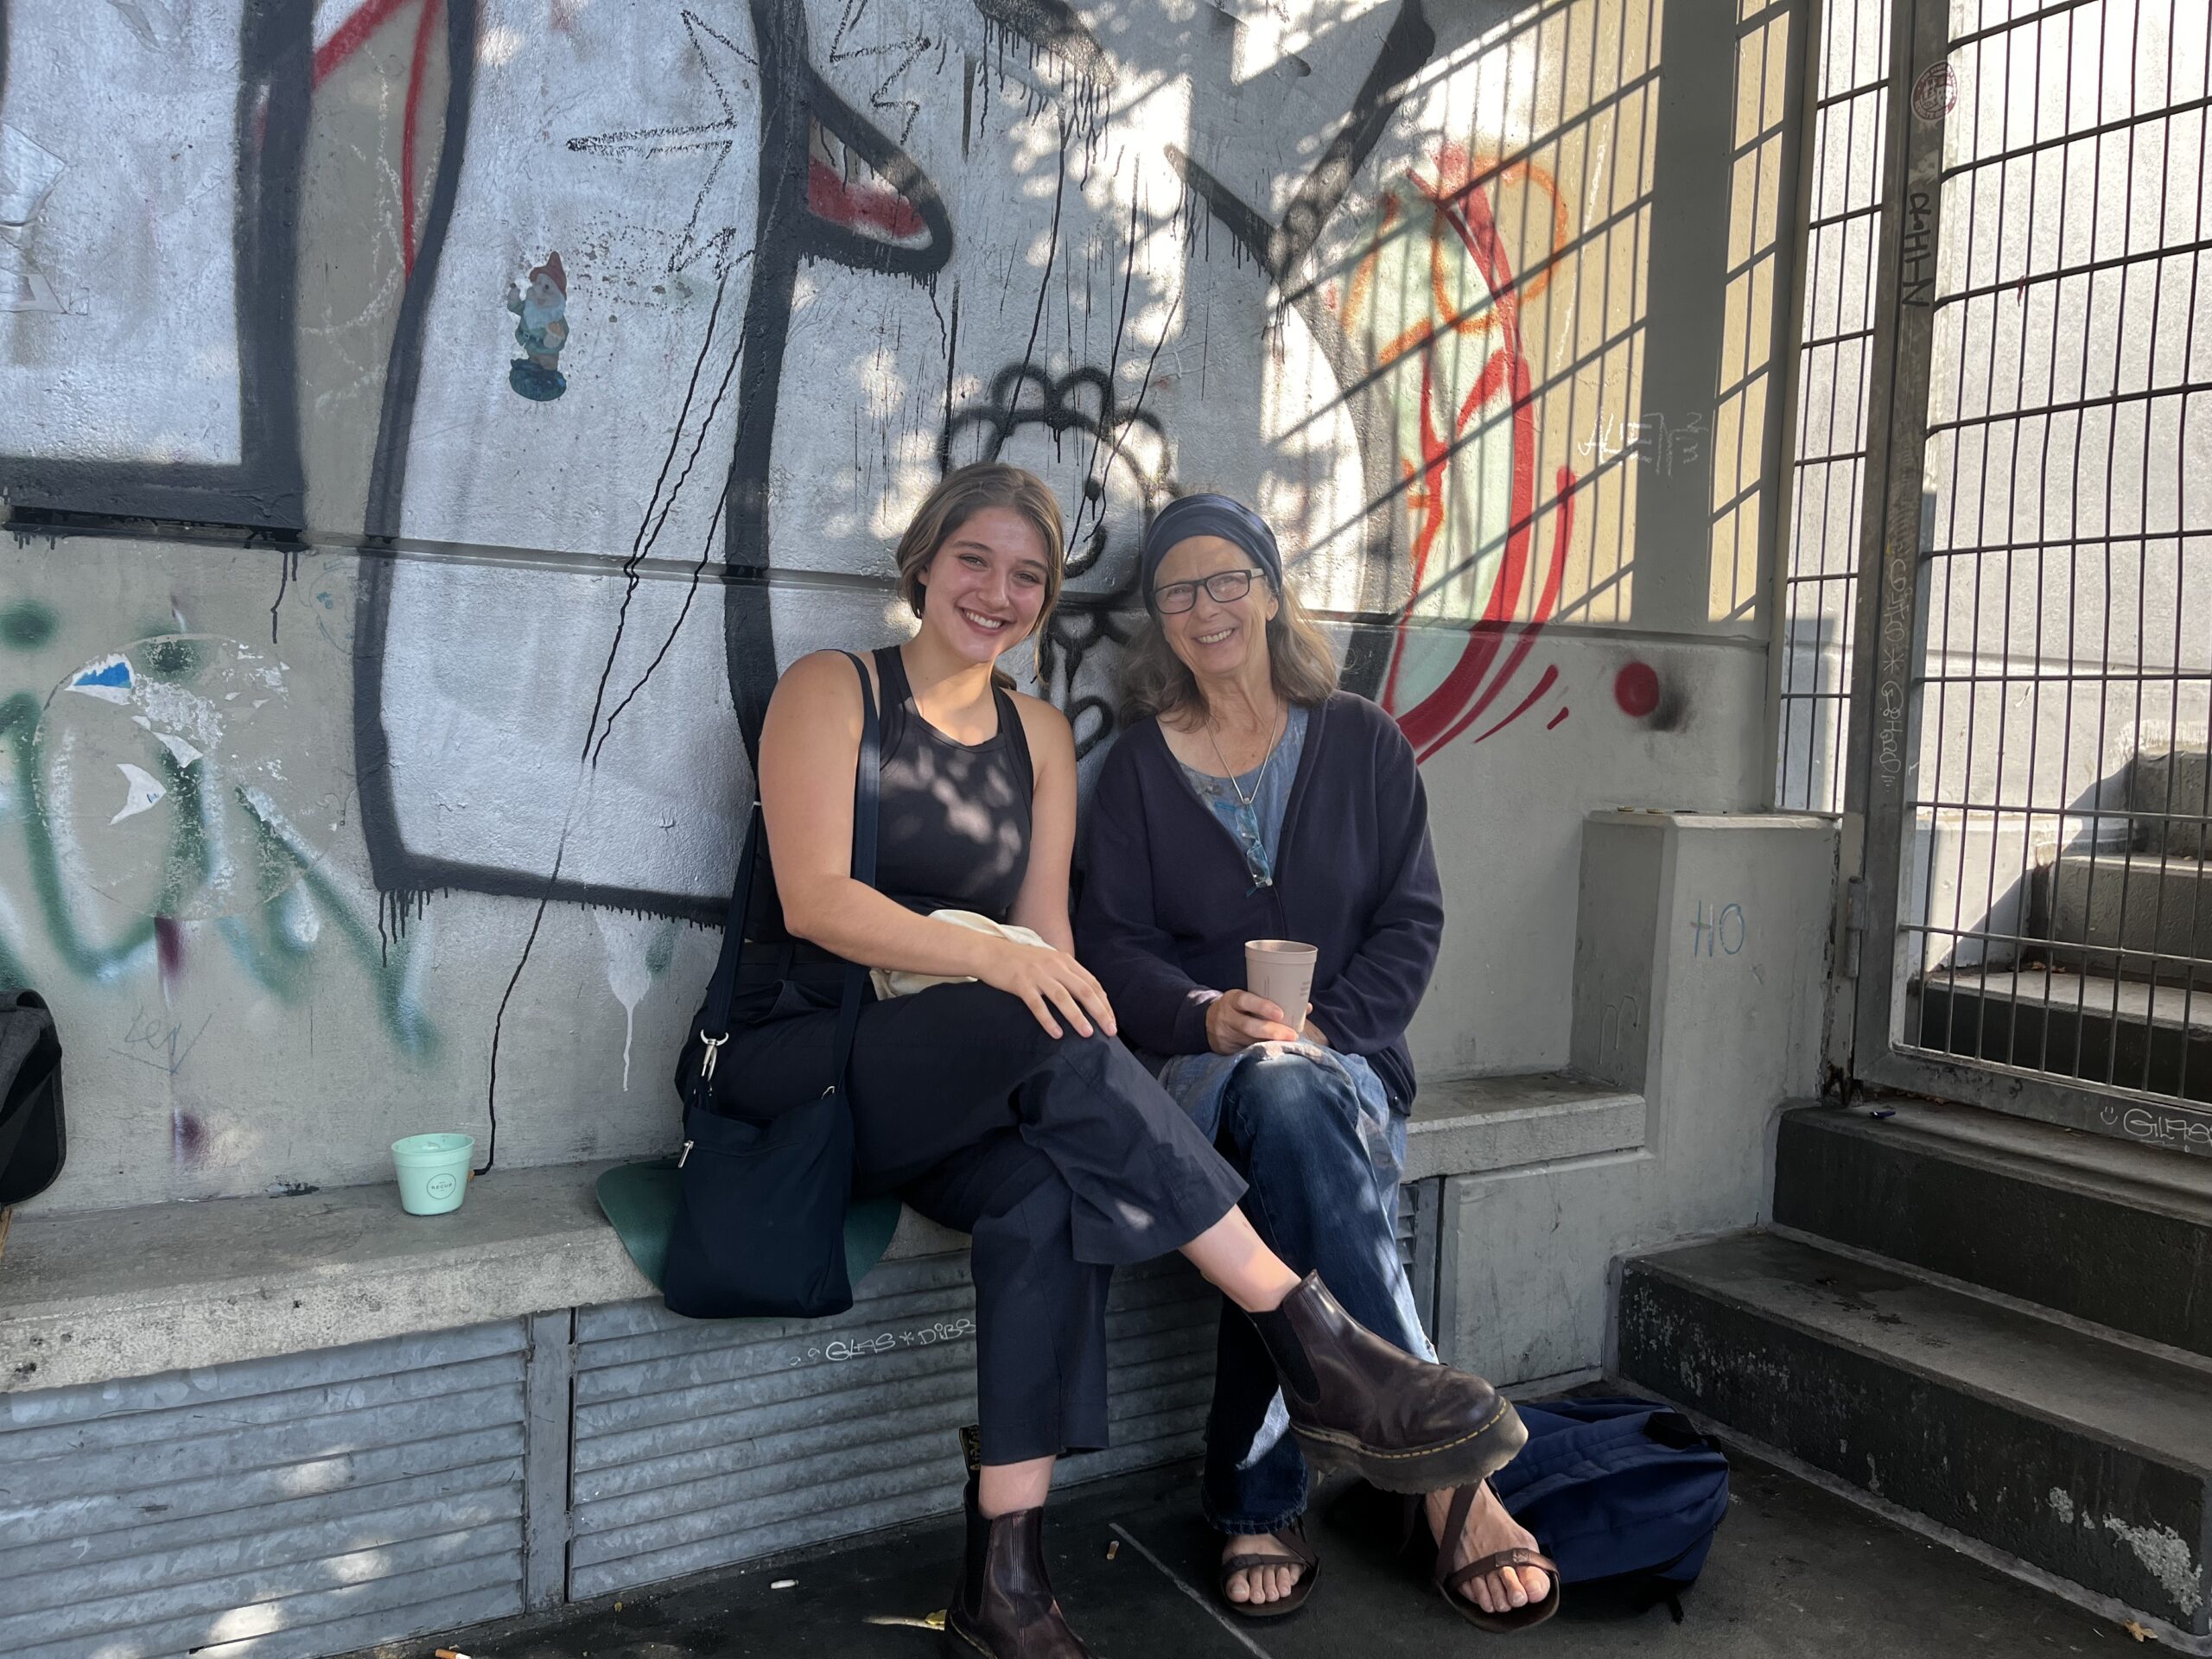 Eden Brockman sits with her host mom in Germany on a concrete bench with graffiti on the wall behind them.